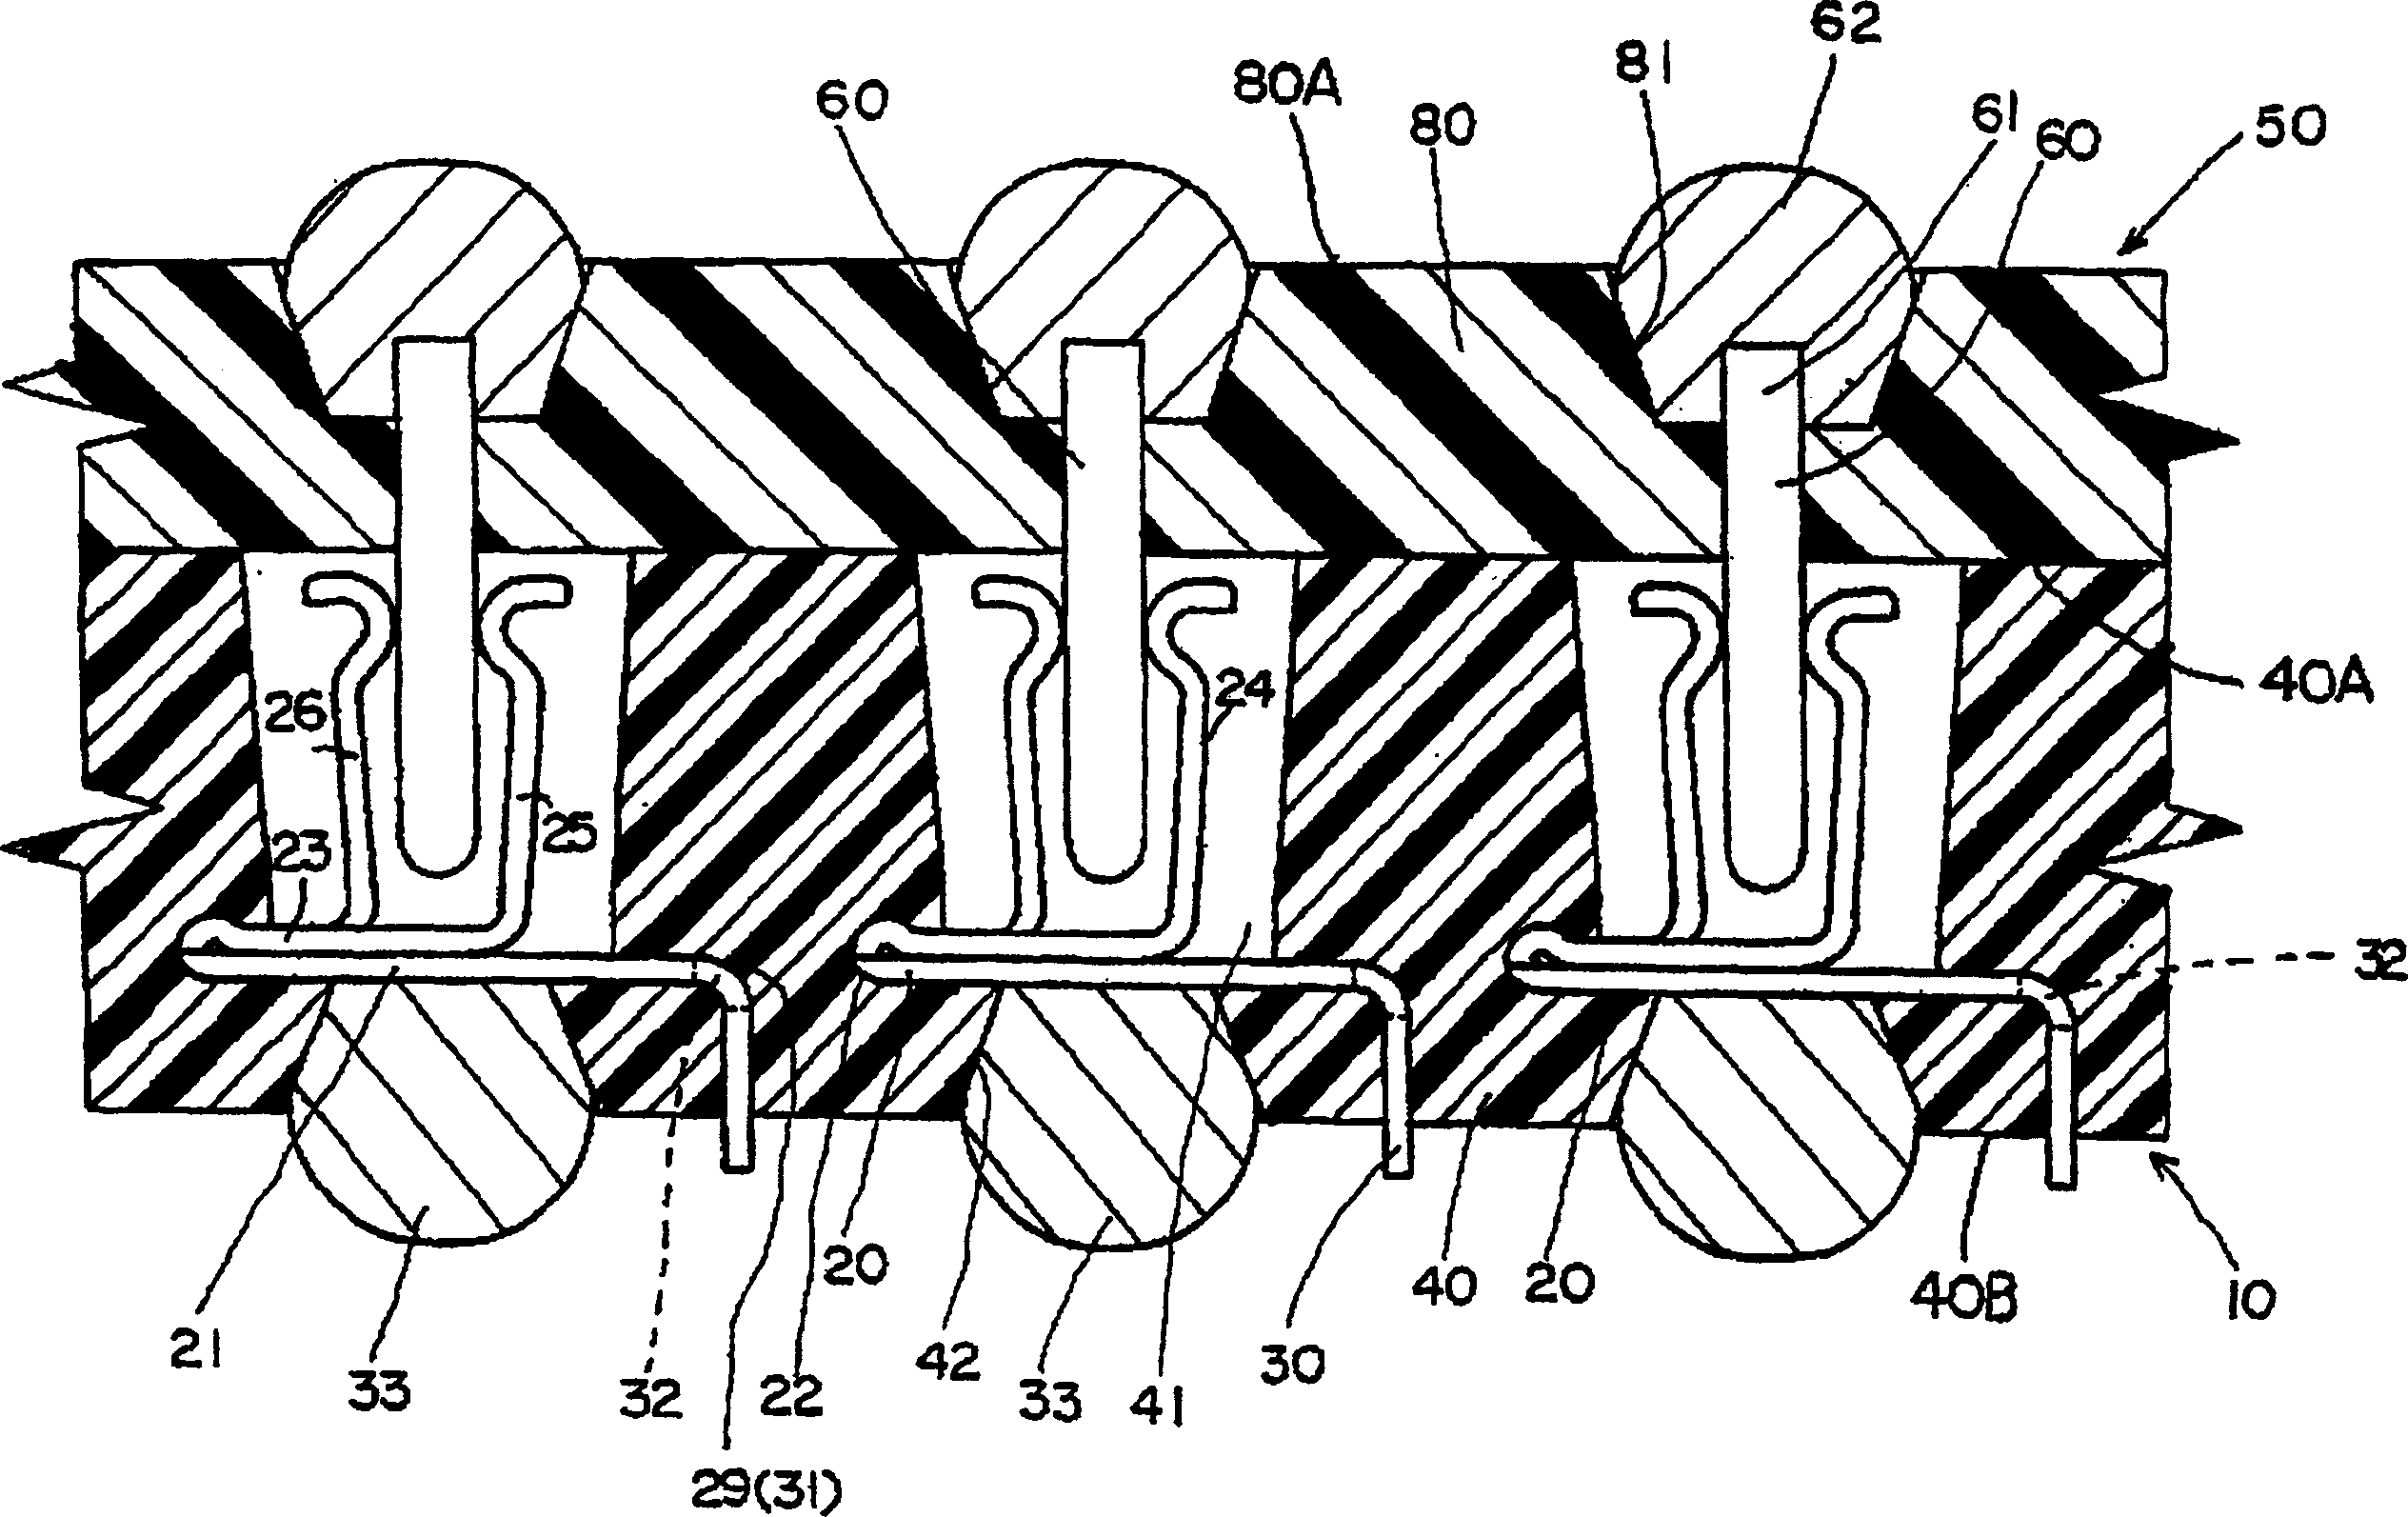 Electrical connector for printed circuit board